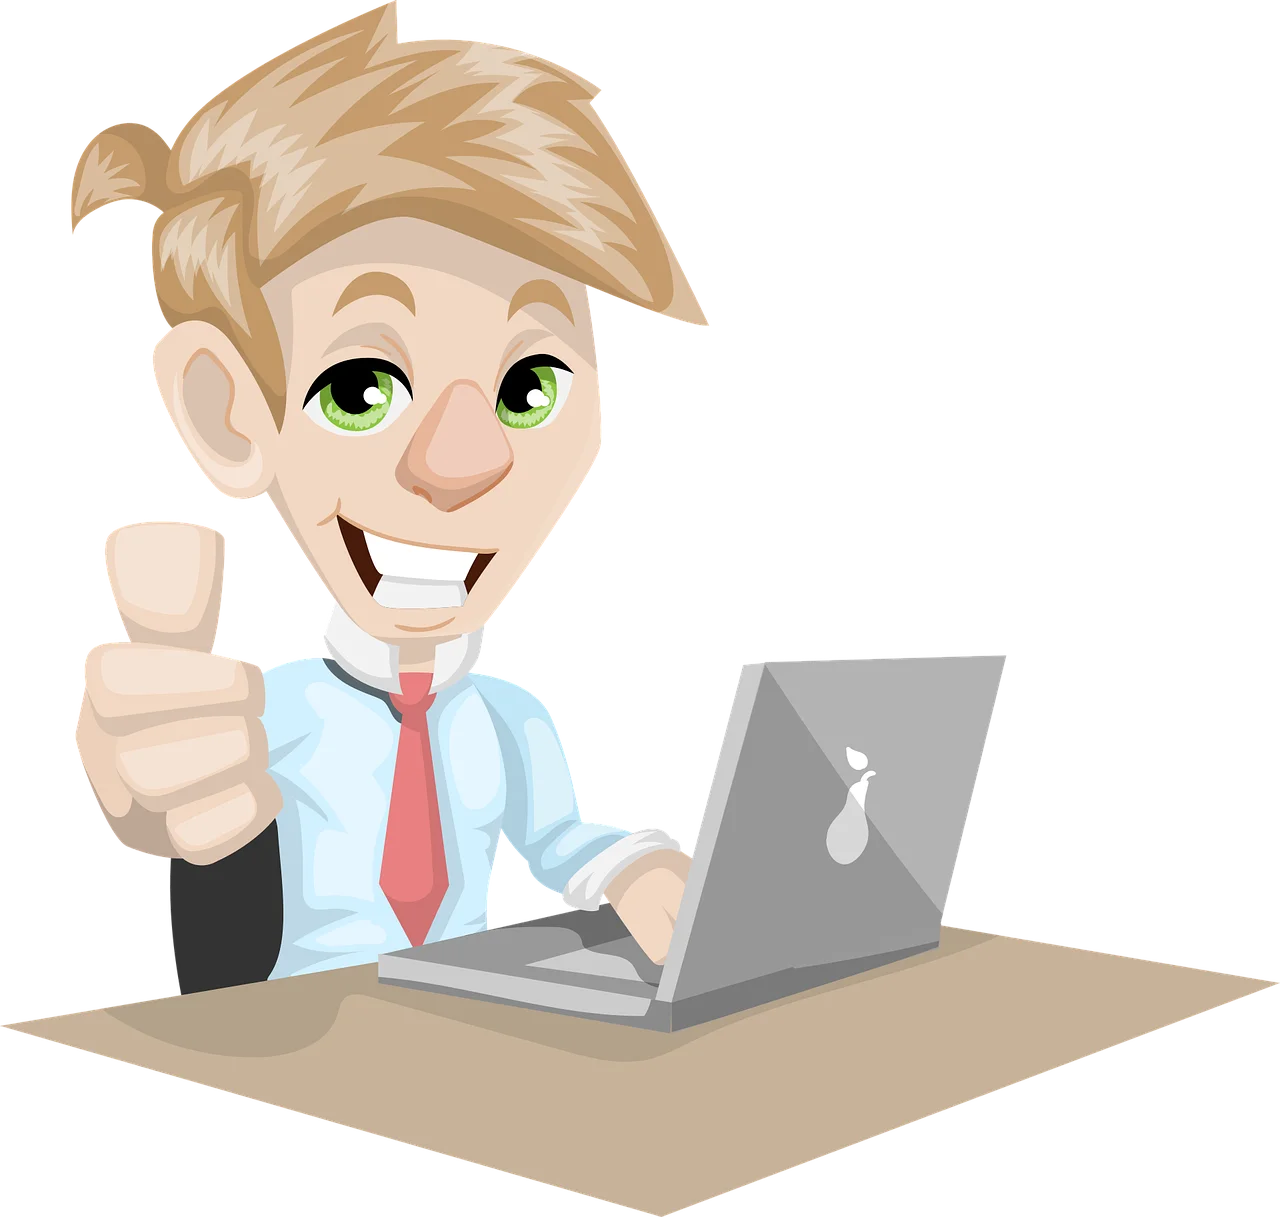 The image with a white background indicates a cartoon showing the thumb and a laptop.